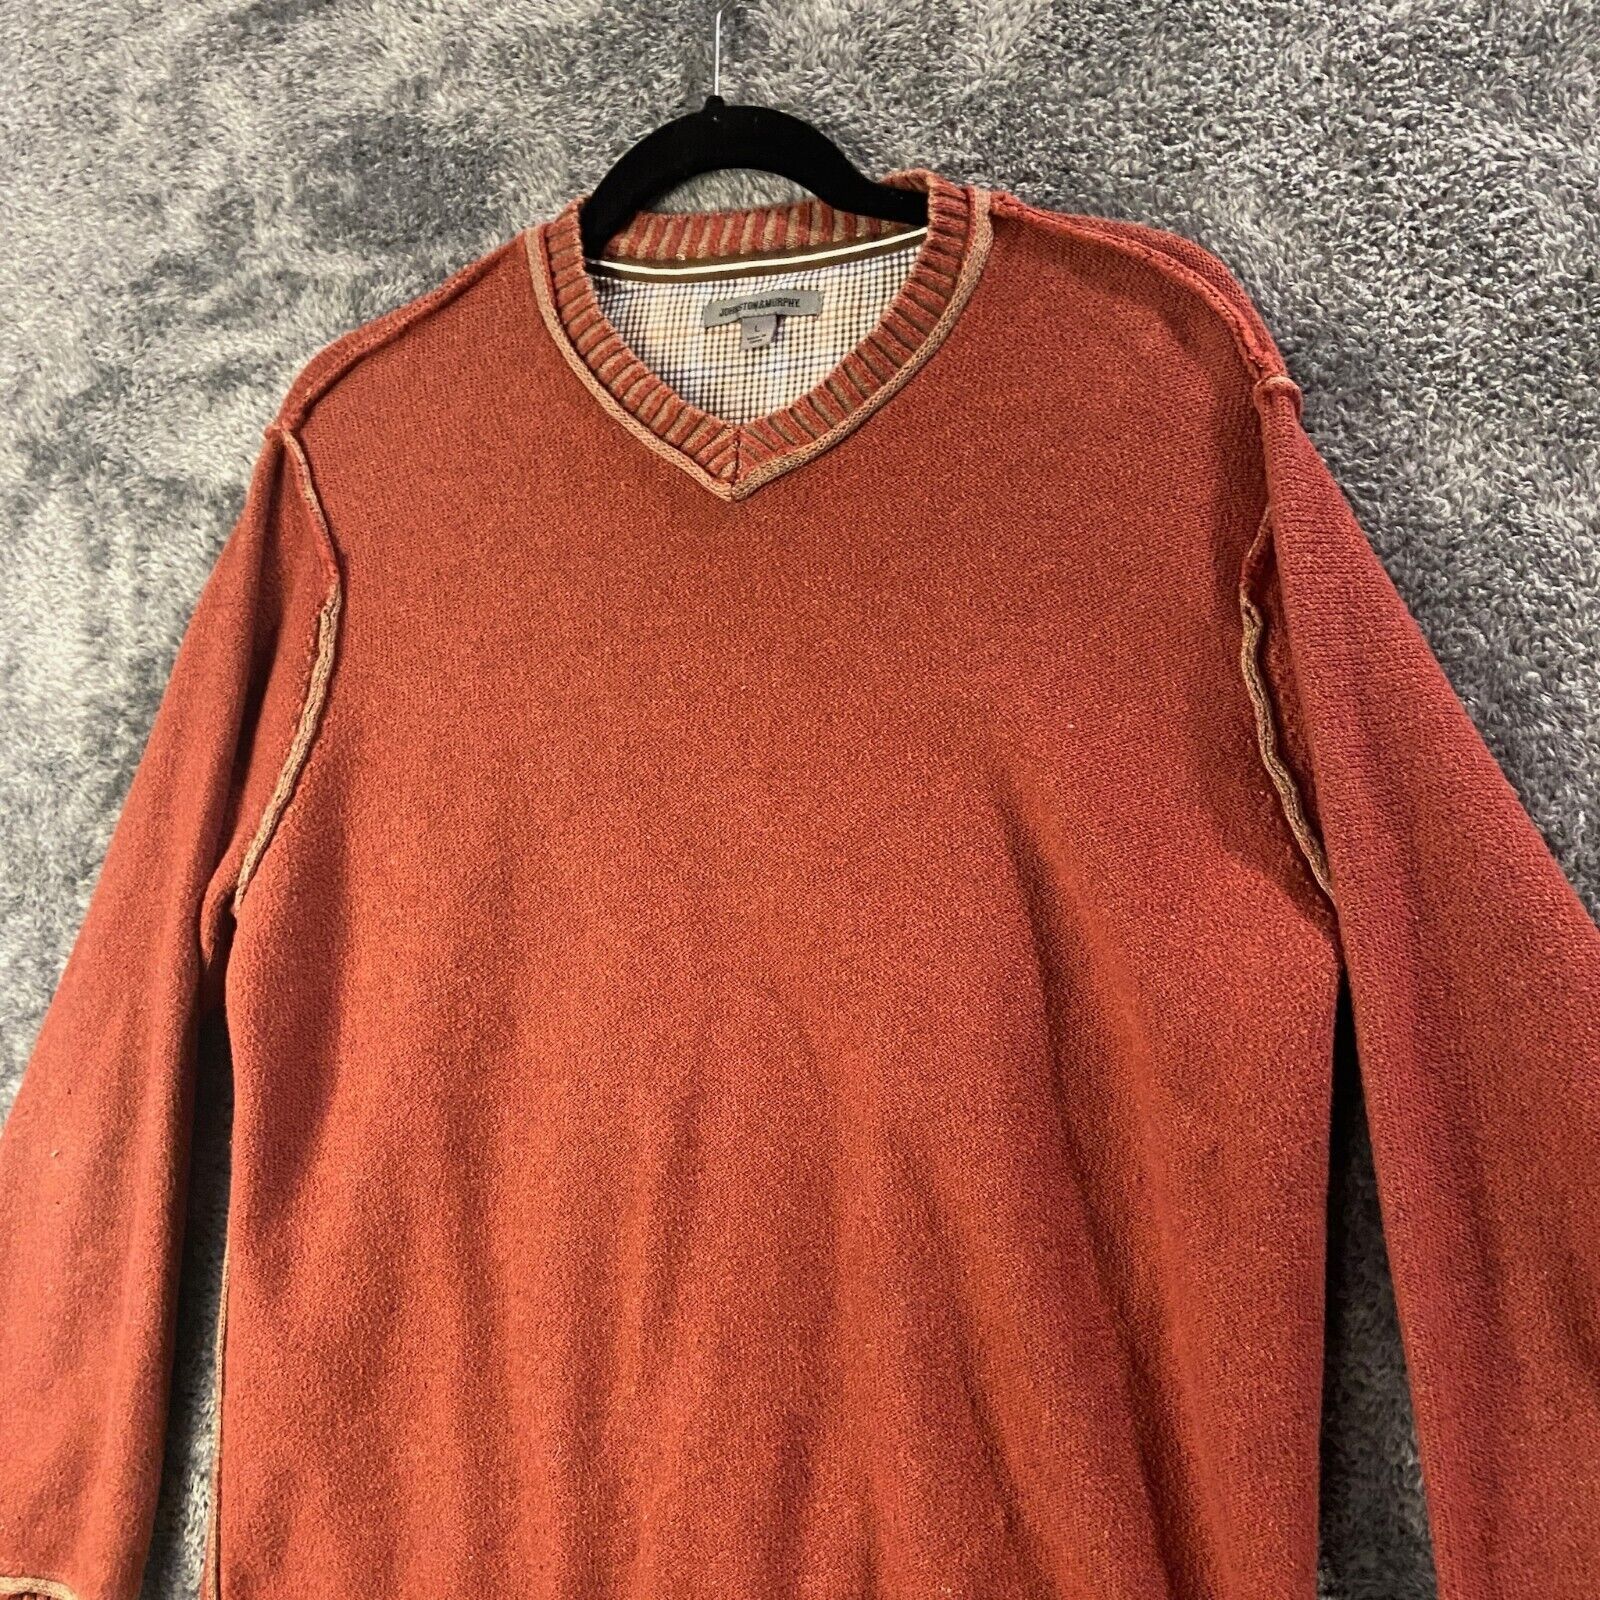 Primary image for Johnston & Murphy Sweater Mens Large Orange Wool Nylon Blend Knit Pullover